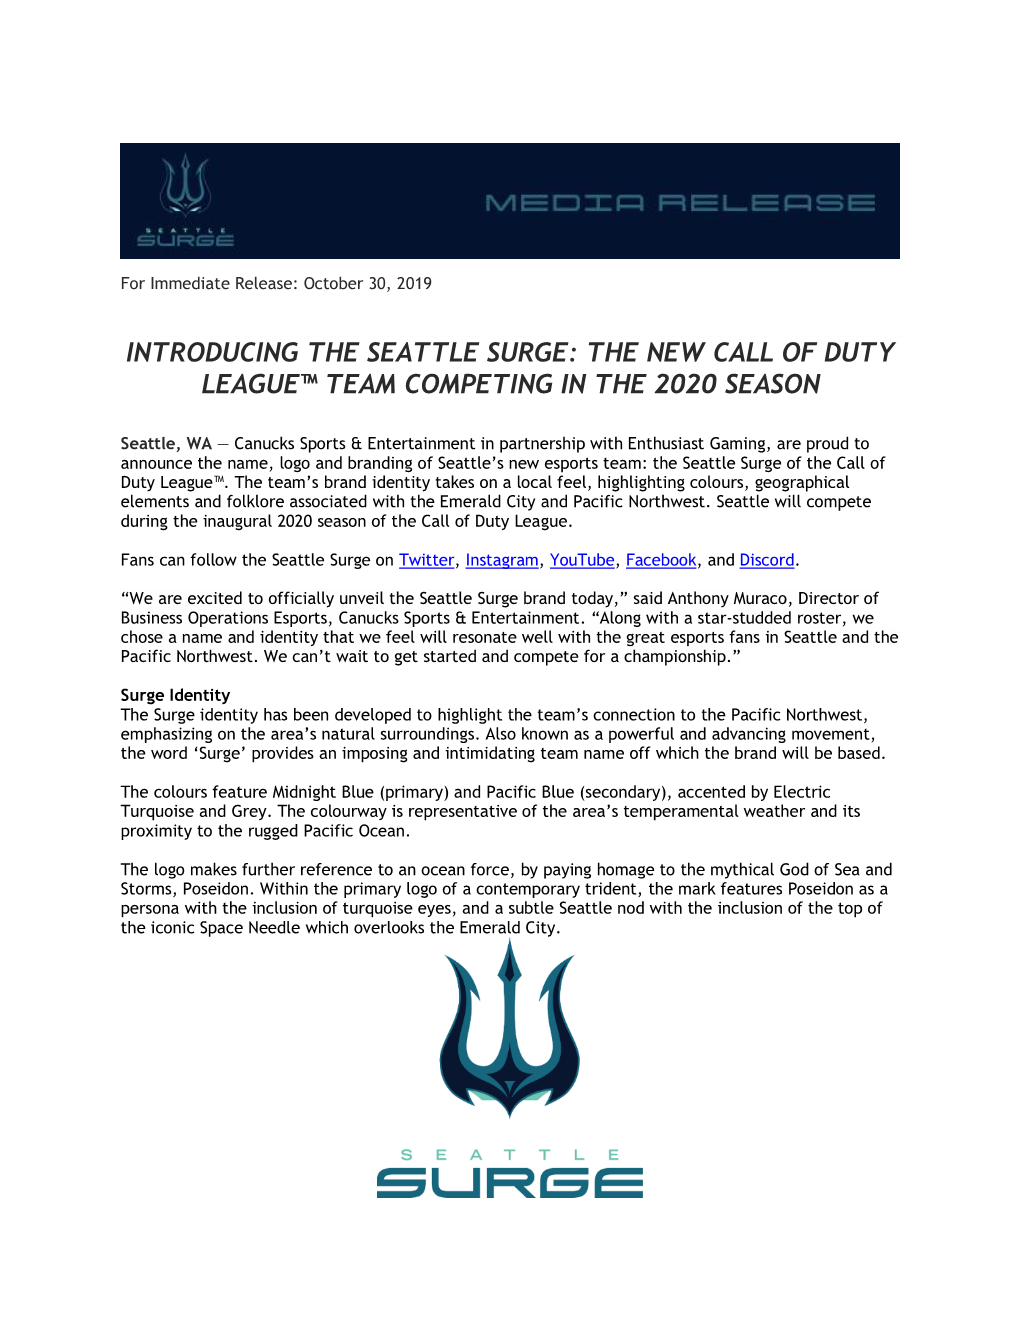 Introducing the Seattle Surge: the New Call of Duty League™ Team Competing in the 2020 Season